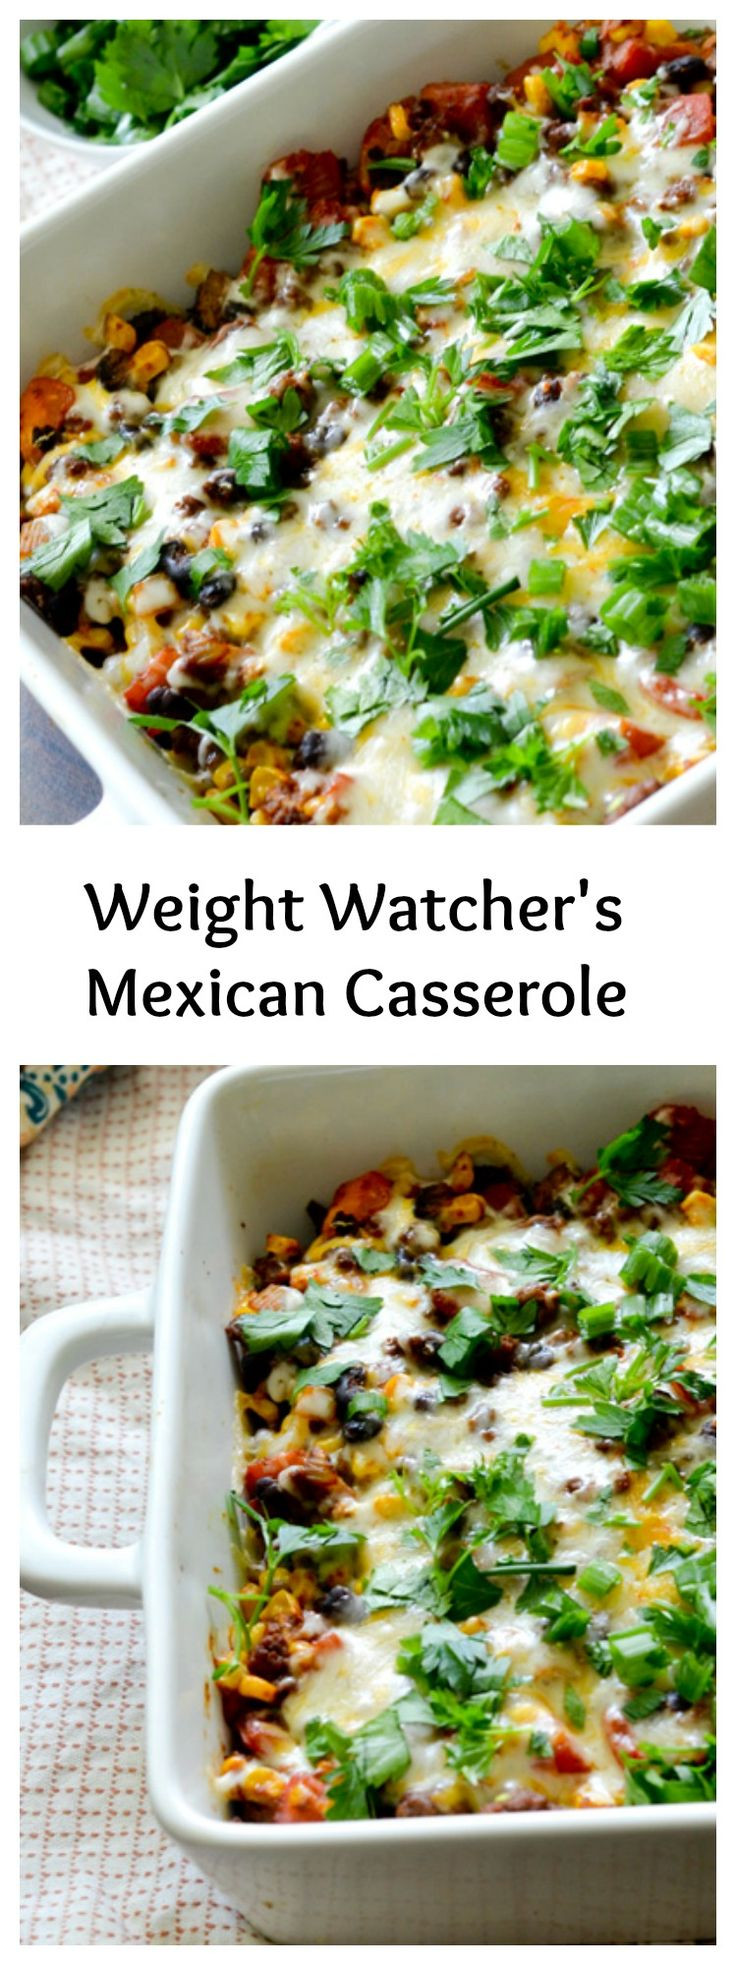 Healthy Mexican Recipes For Weight Loss
 HEALTYFOOD Diet to lose weight Weight Watcher s